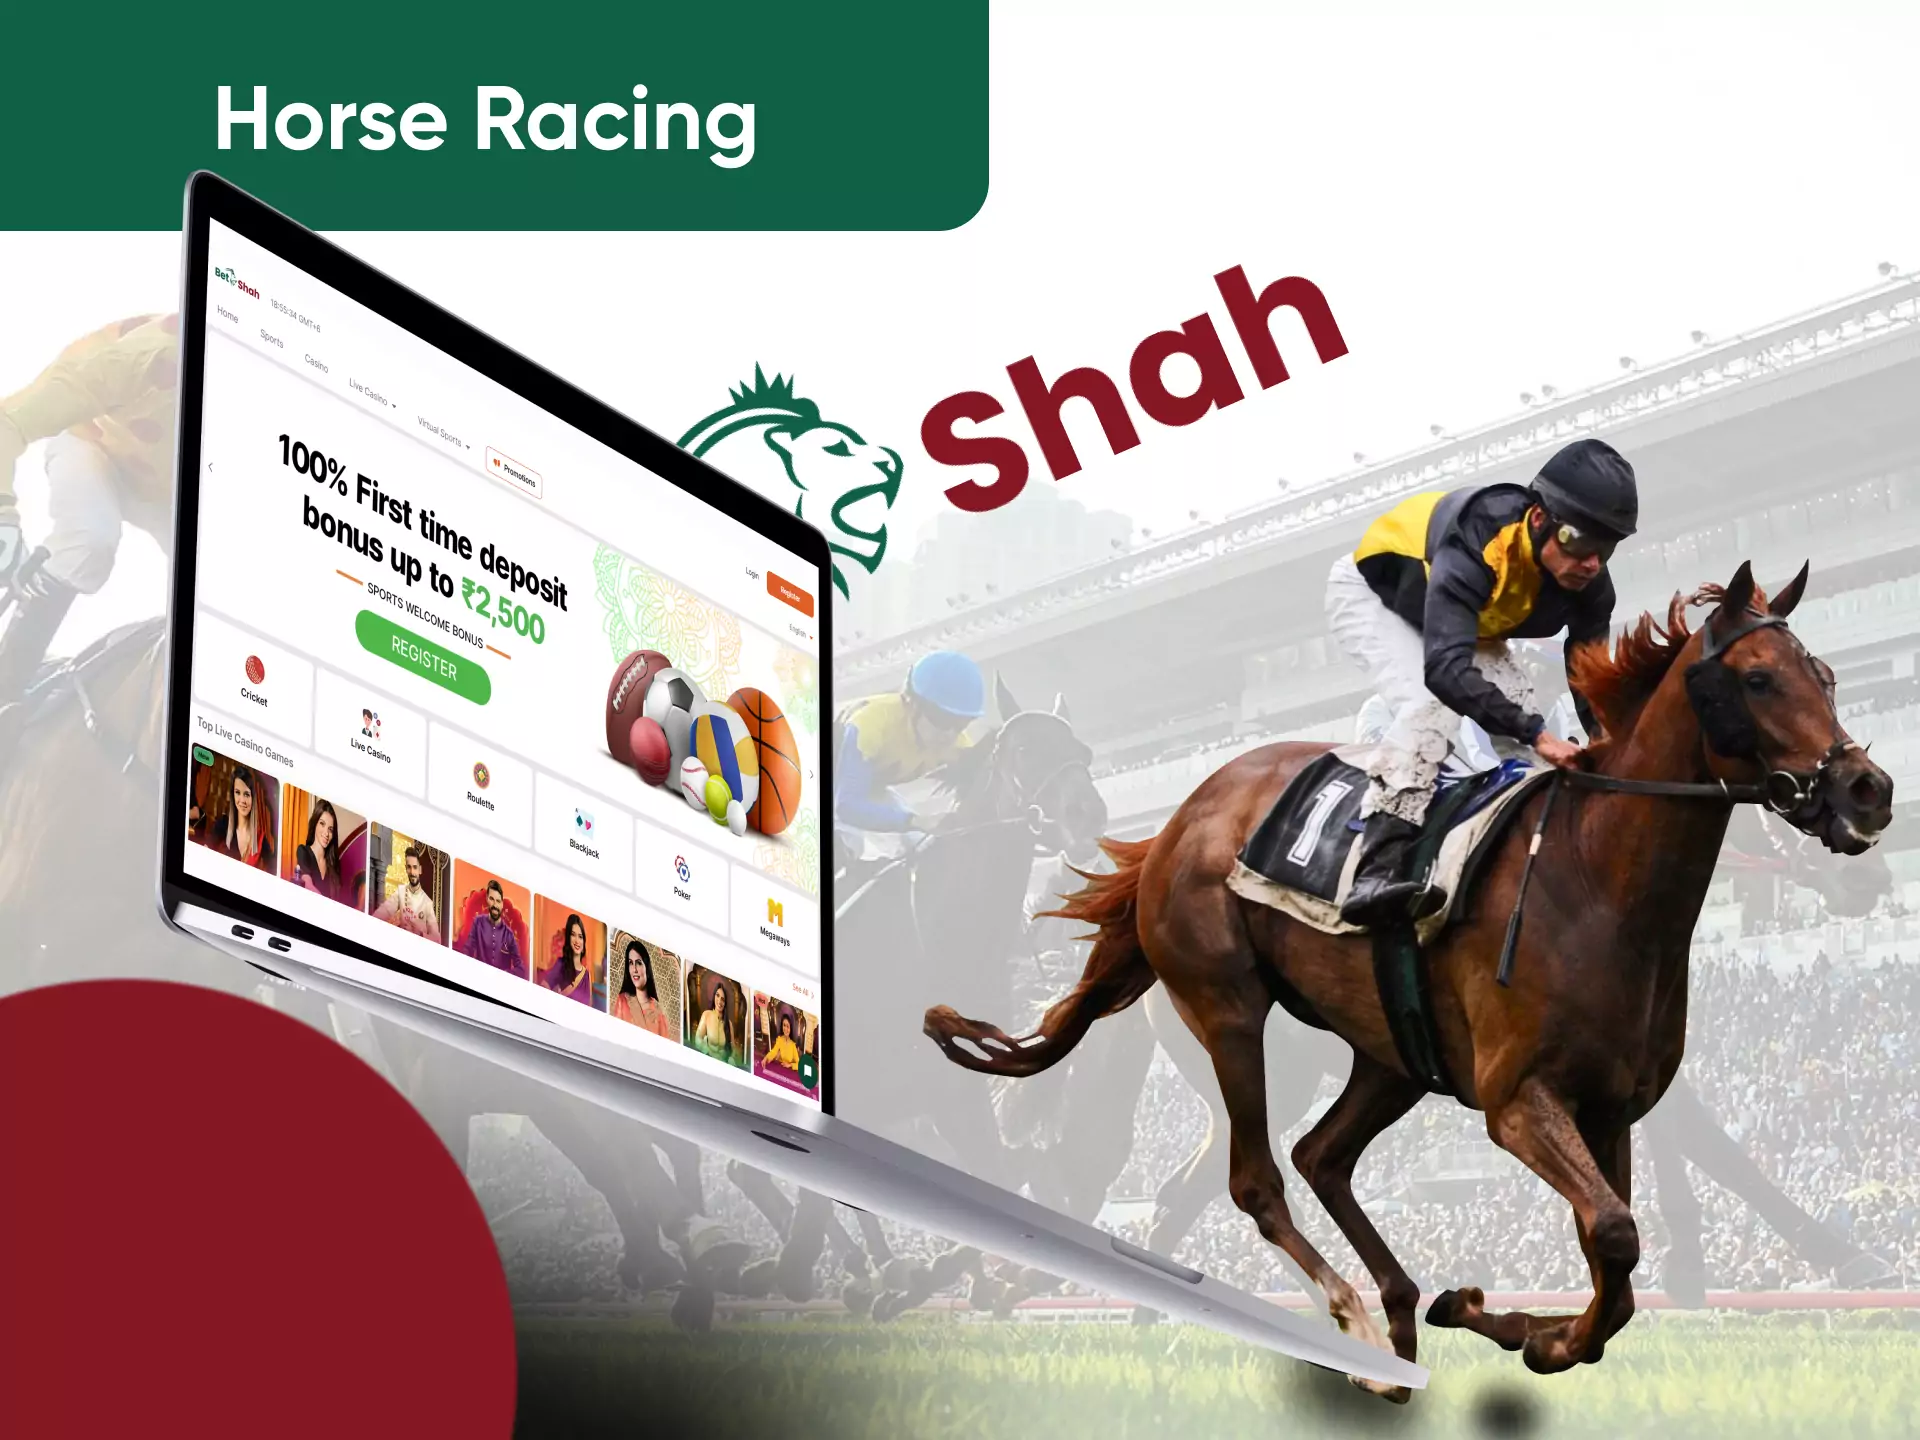 On Betshah, you can place bets on horse racing.